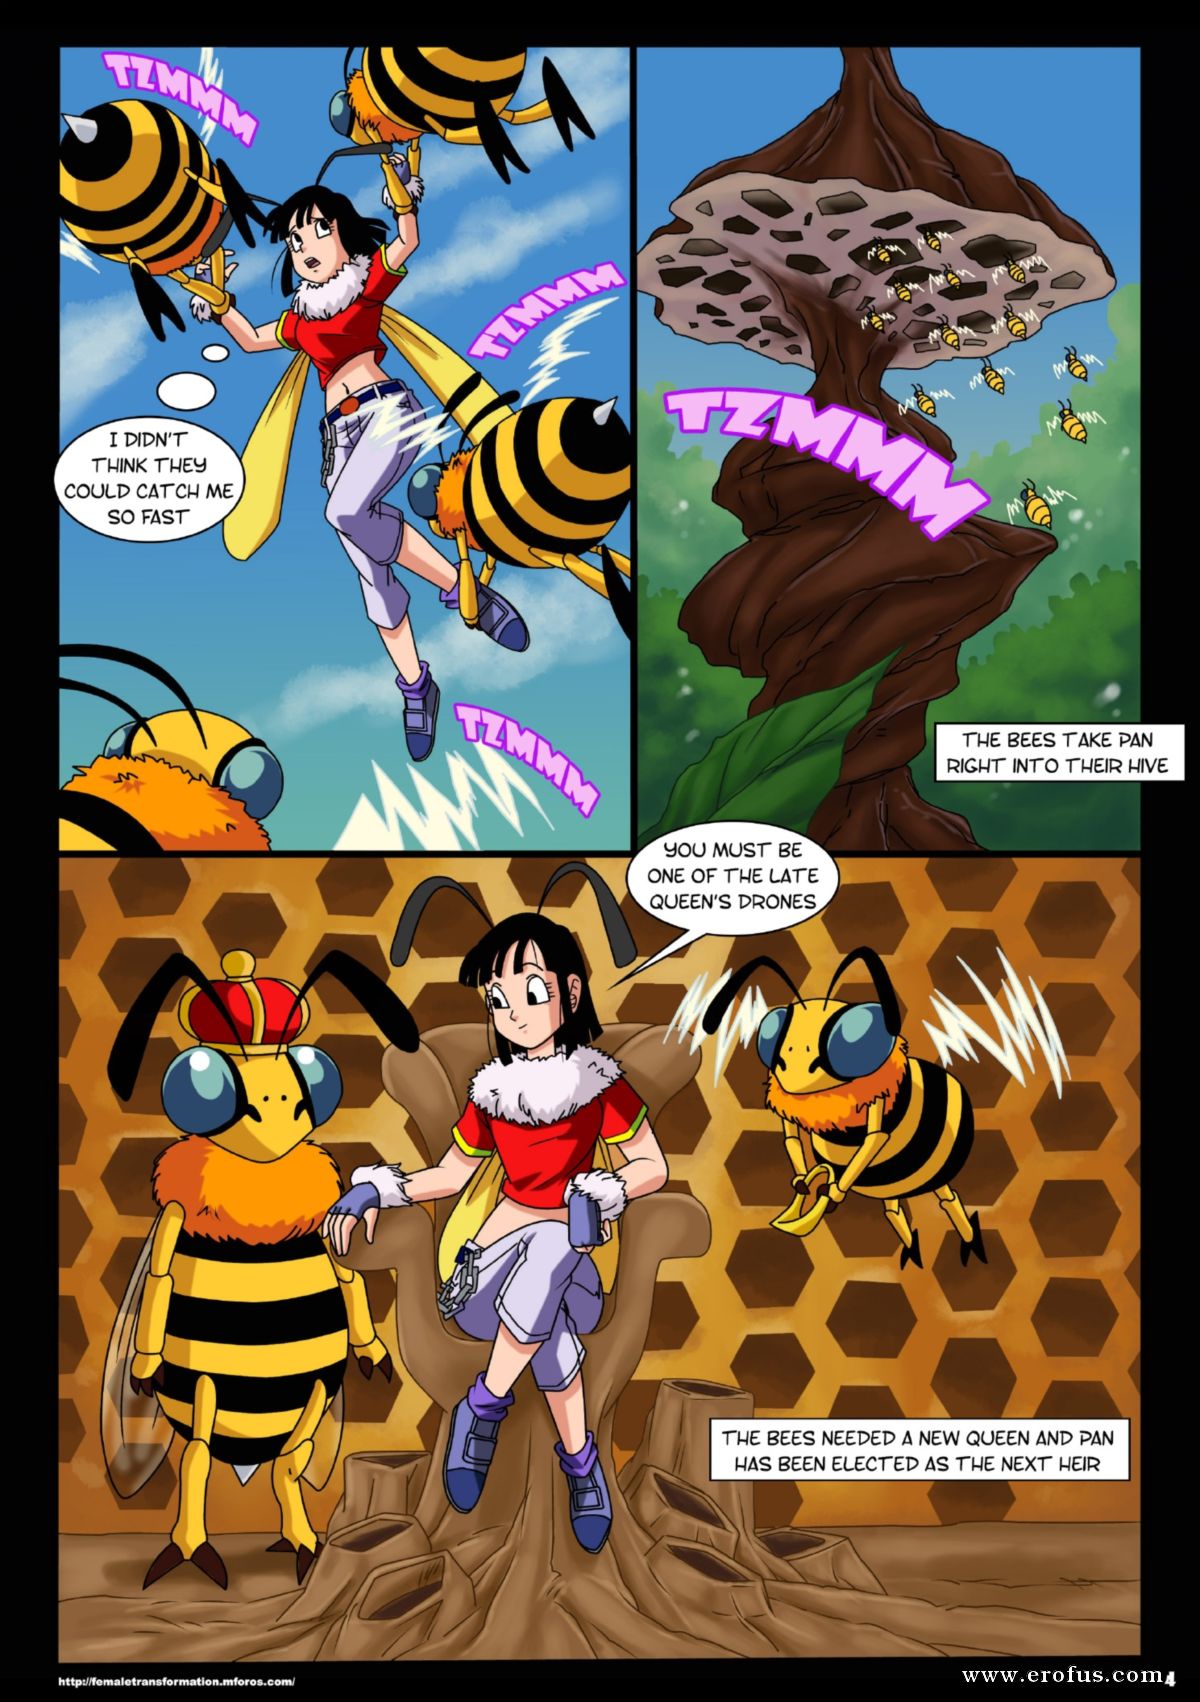 Bees with part